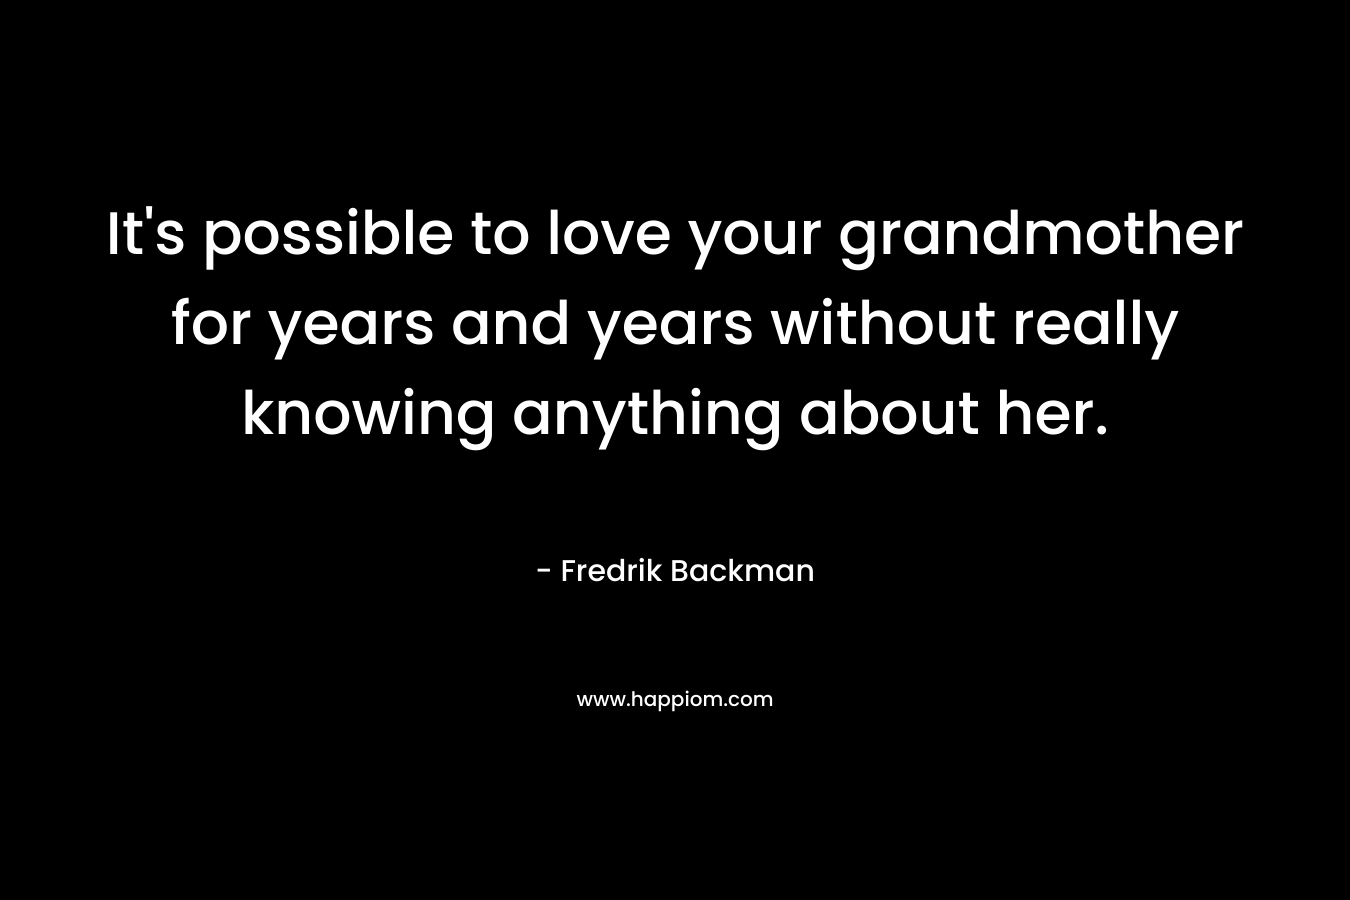 It's possible to love your grandmother for years and years without really knowing anything about her.